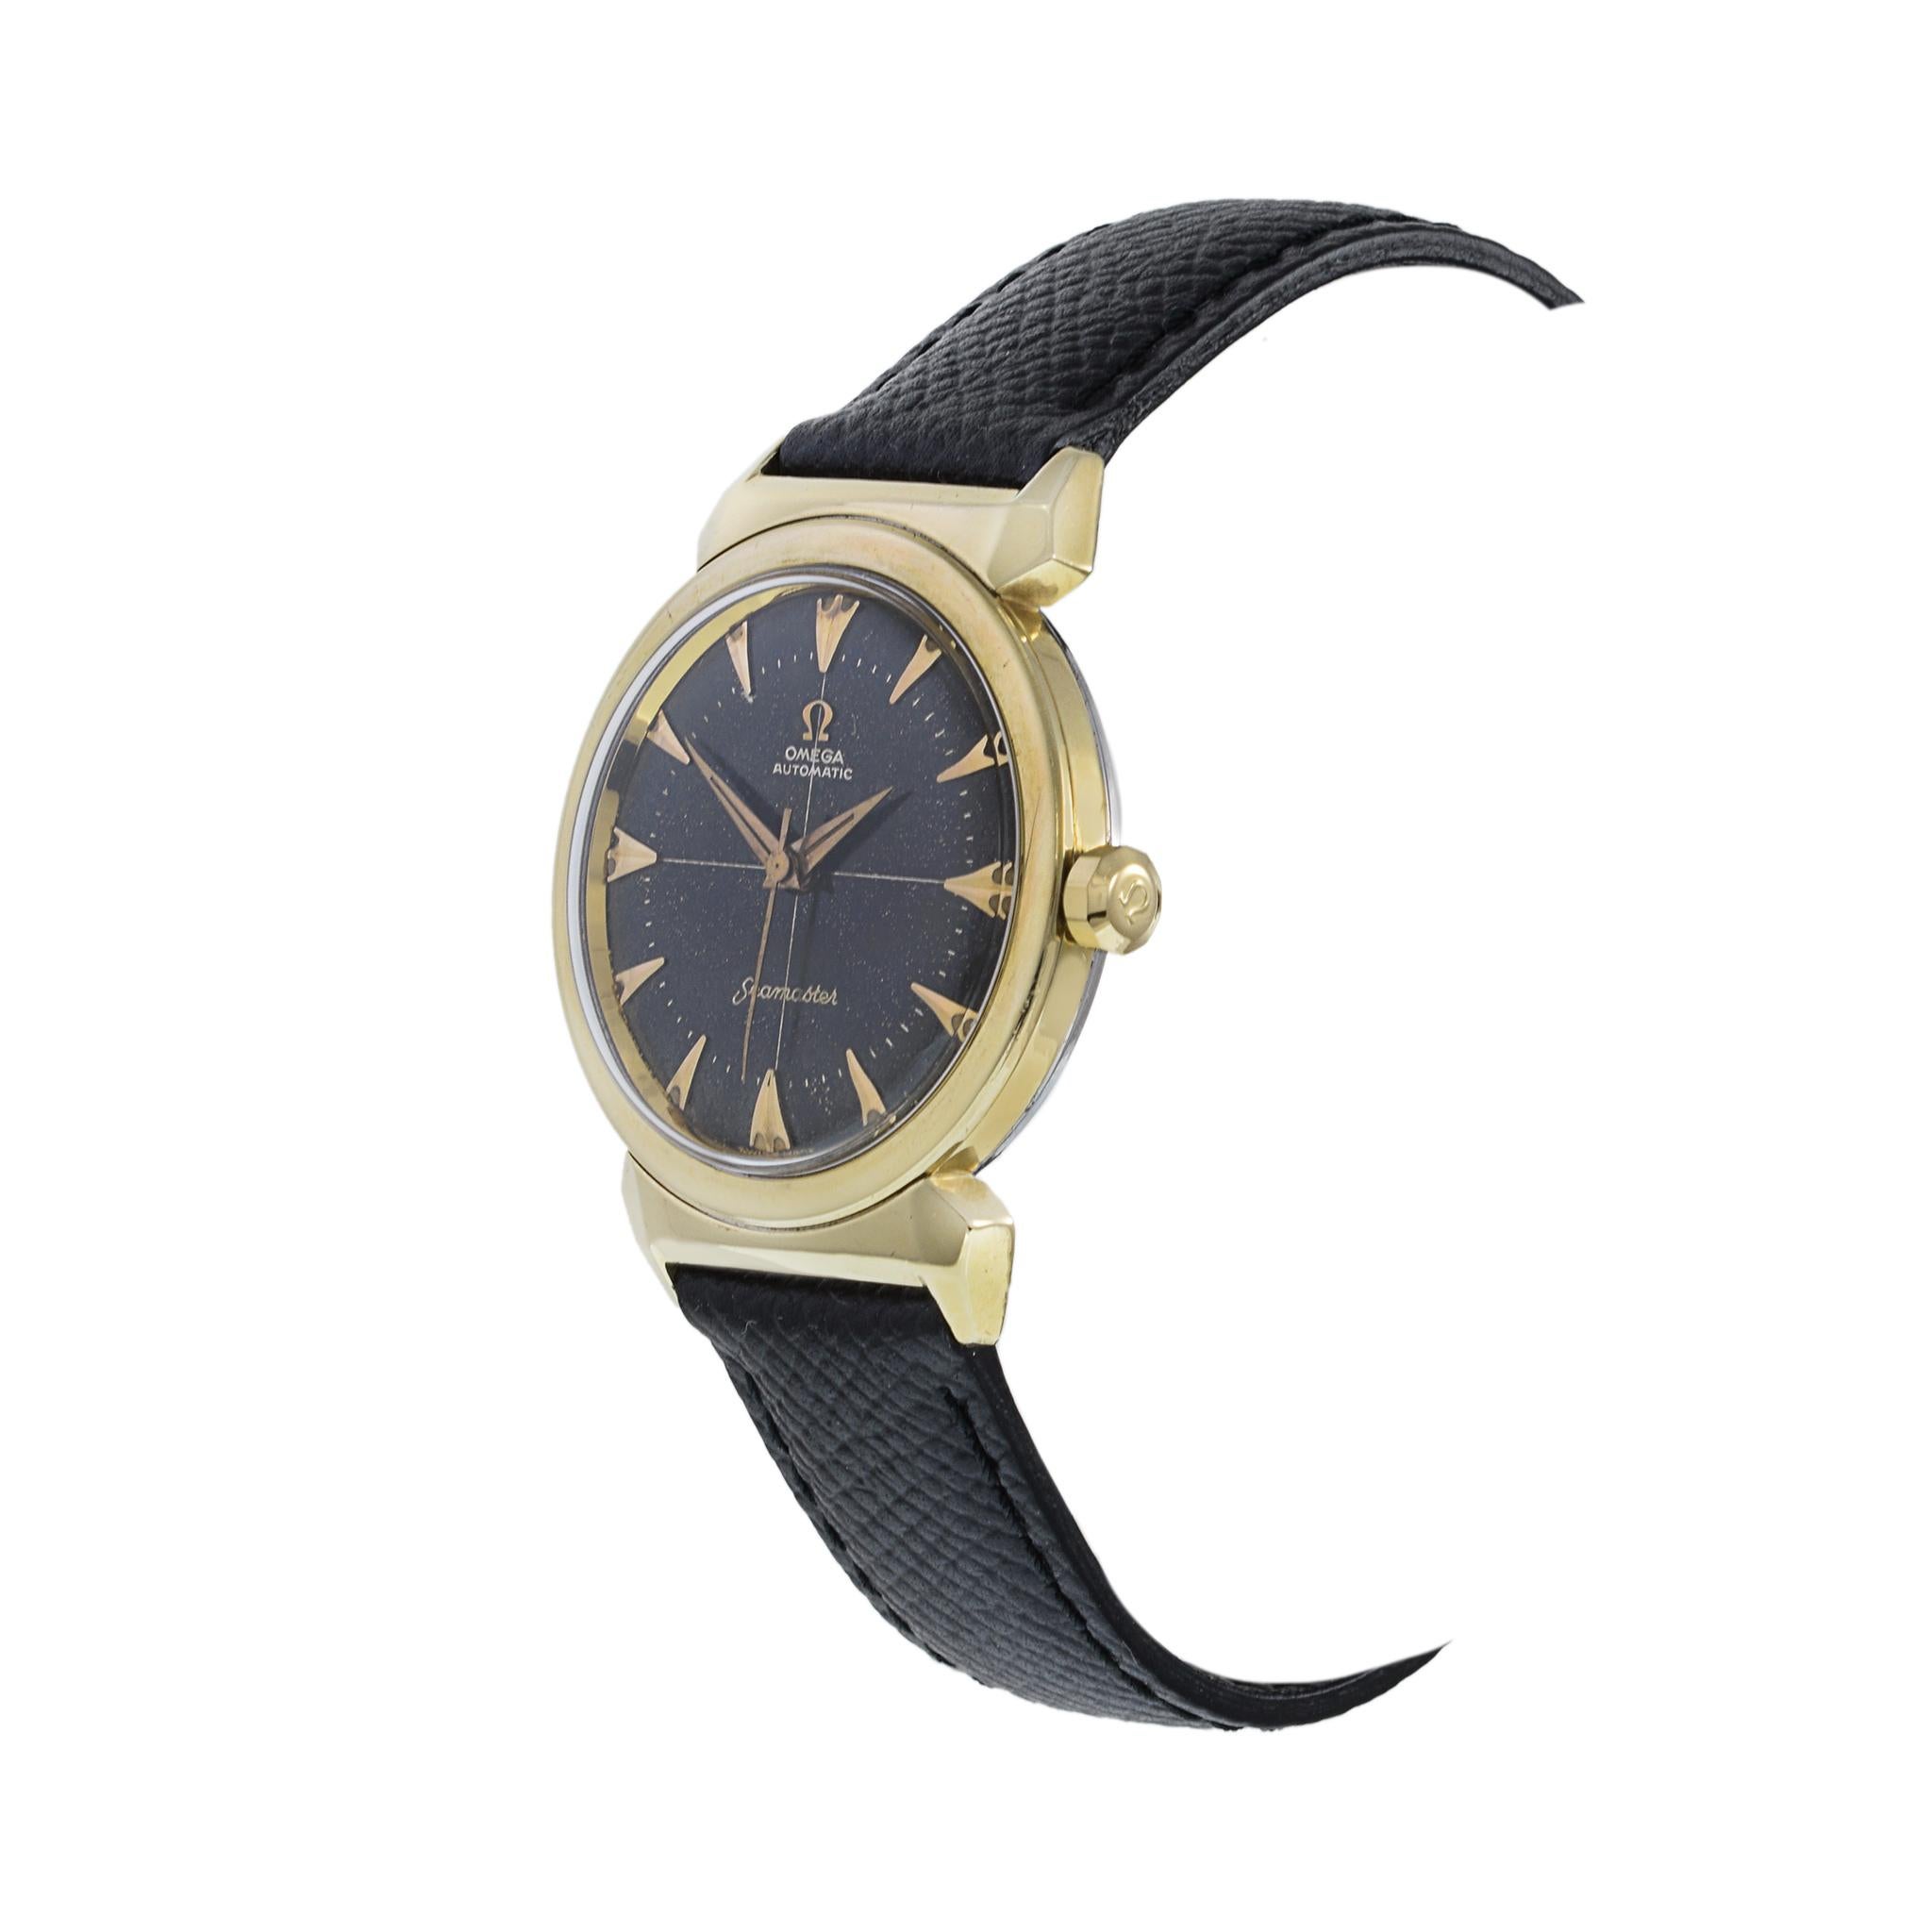 Retro Omega Seamaster Reference 14363 Vintage Scarab Lugs Gold Top For Sale